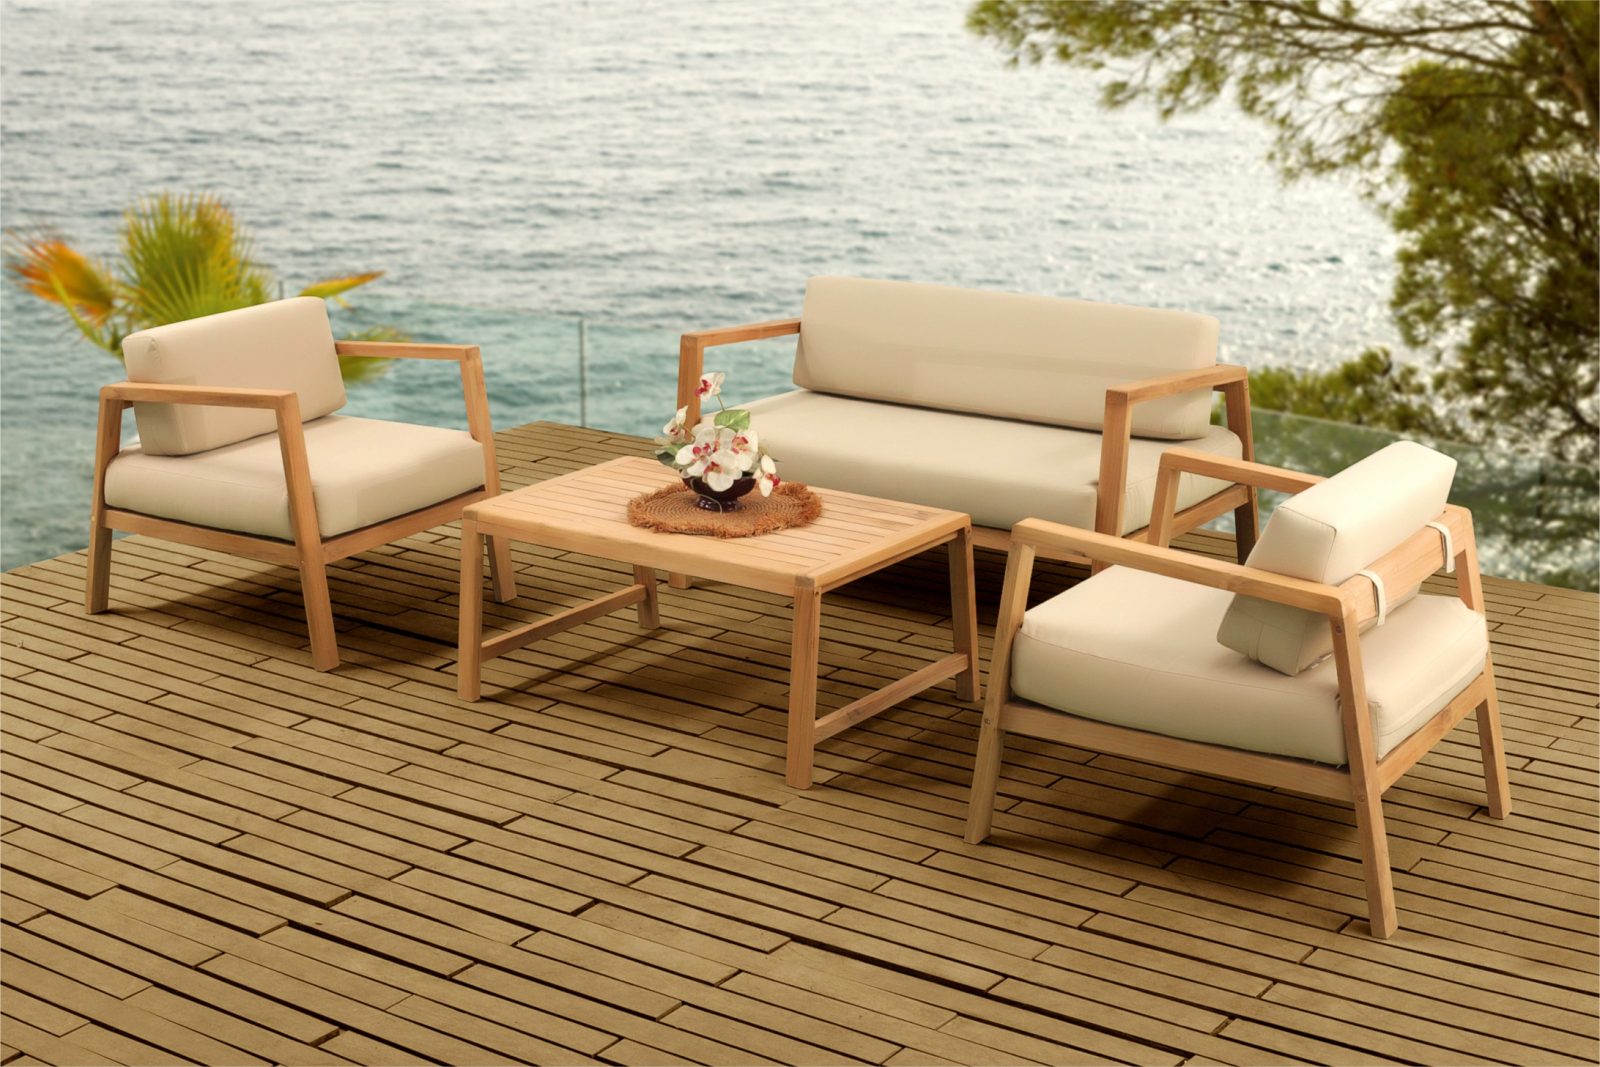 Stylish Teak Furniture For Outdoor Spaces